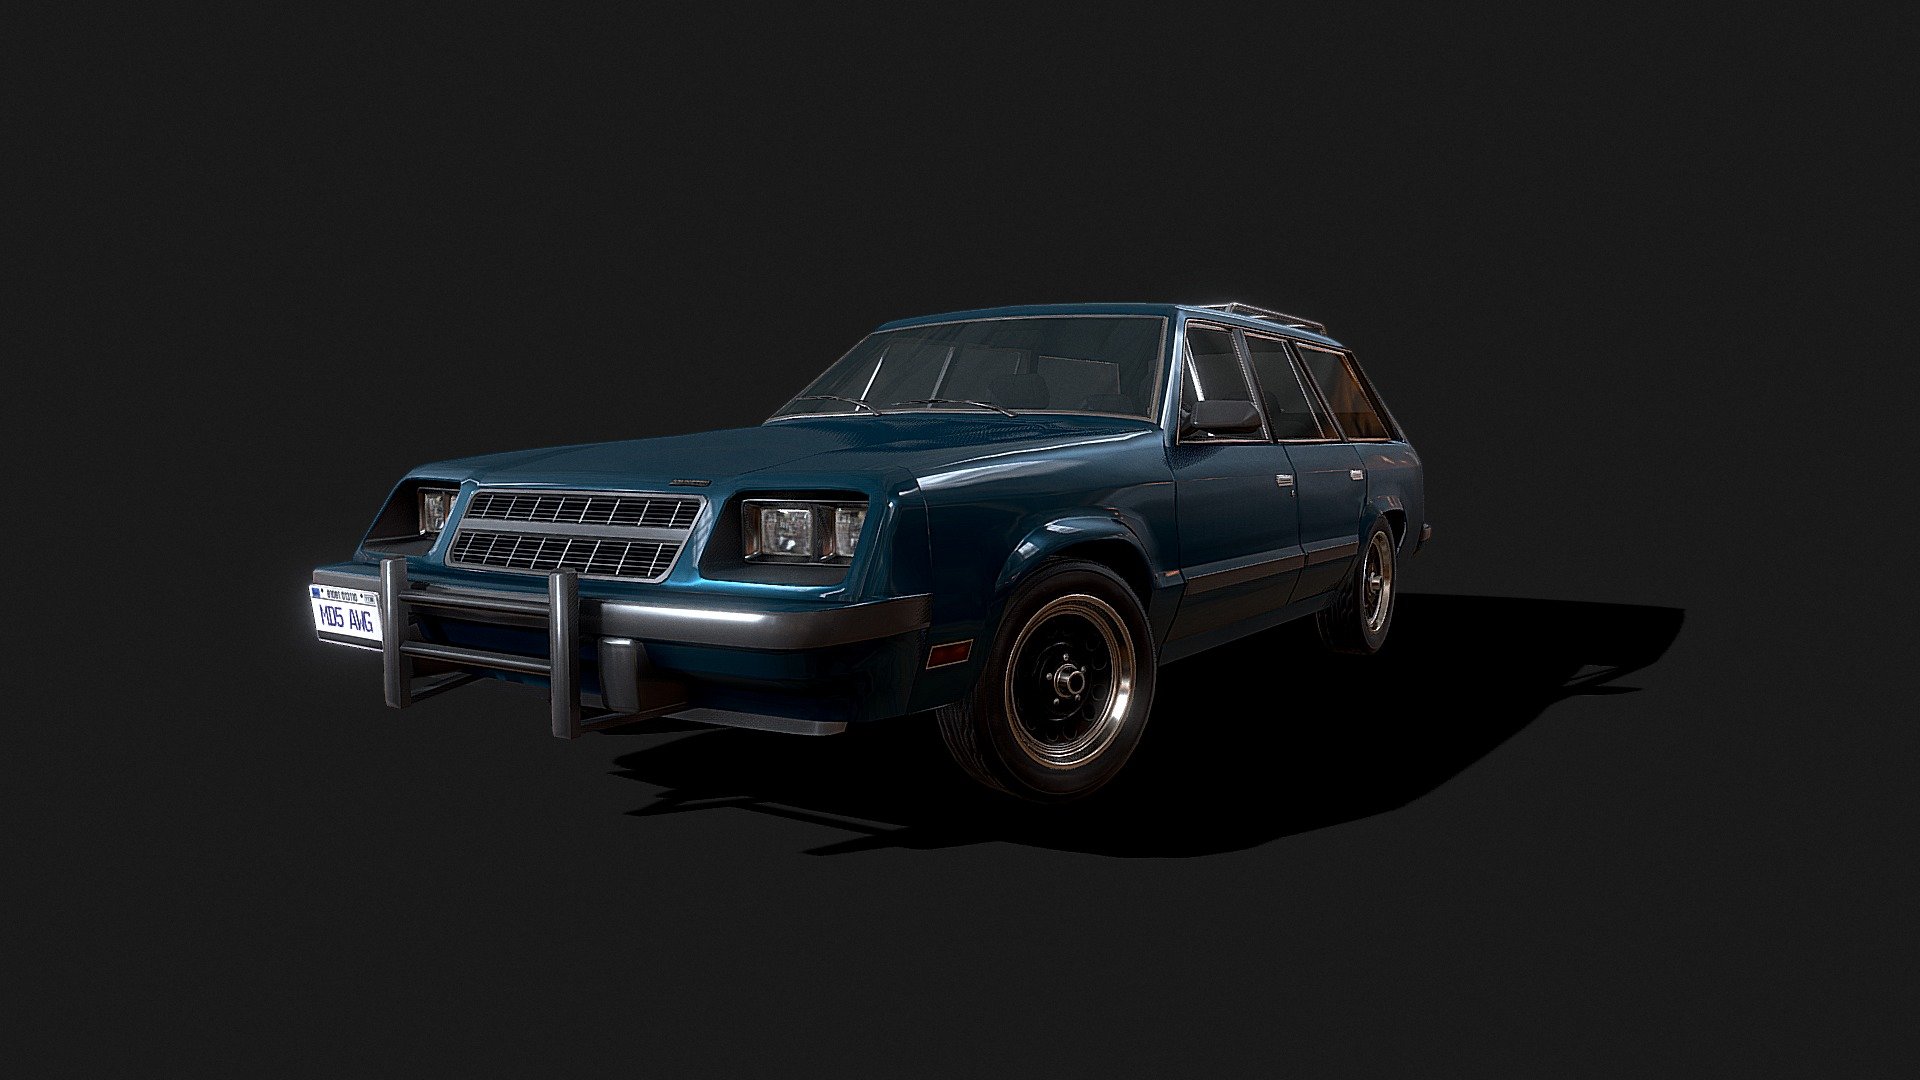 Low poly model of an American mid-size station wagon from the early 80s. I decided that there were too few 80s station wagons with a characteristic sharp front profile, reminiscent of a Pontiac Sunbird, Lebaron or ford's ltd of the 80s. And finaly i made one. Use the model however you see fit, and have a nice day 3d model